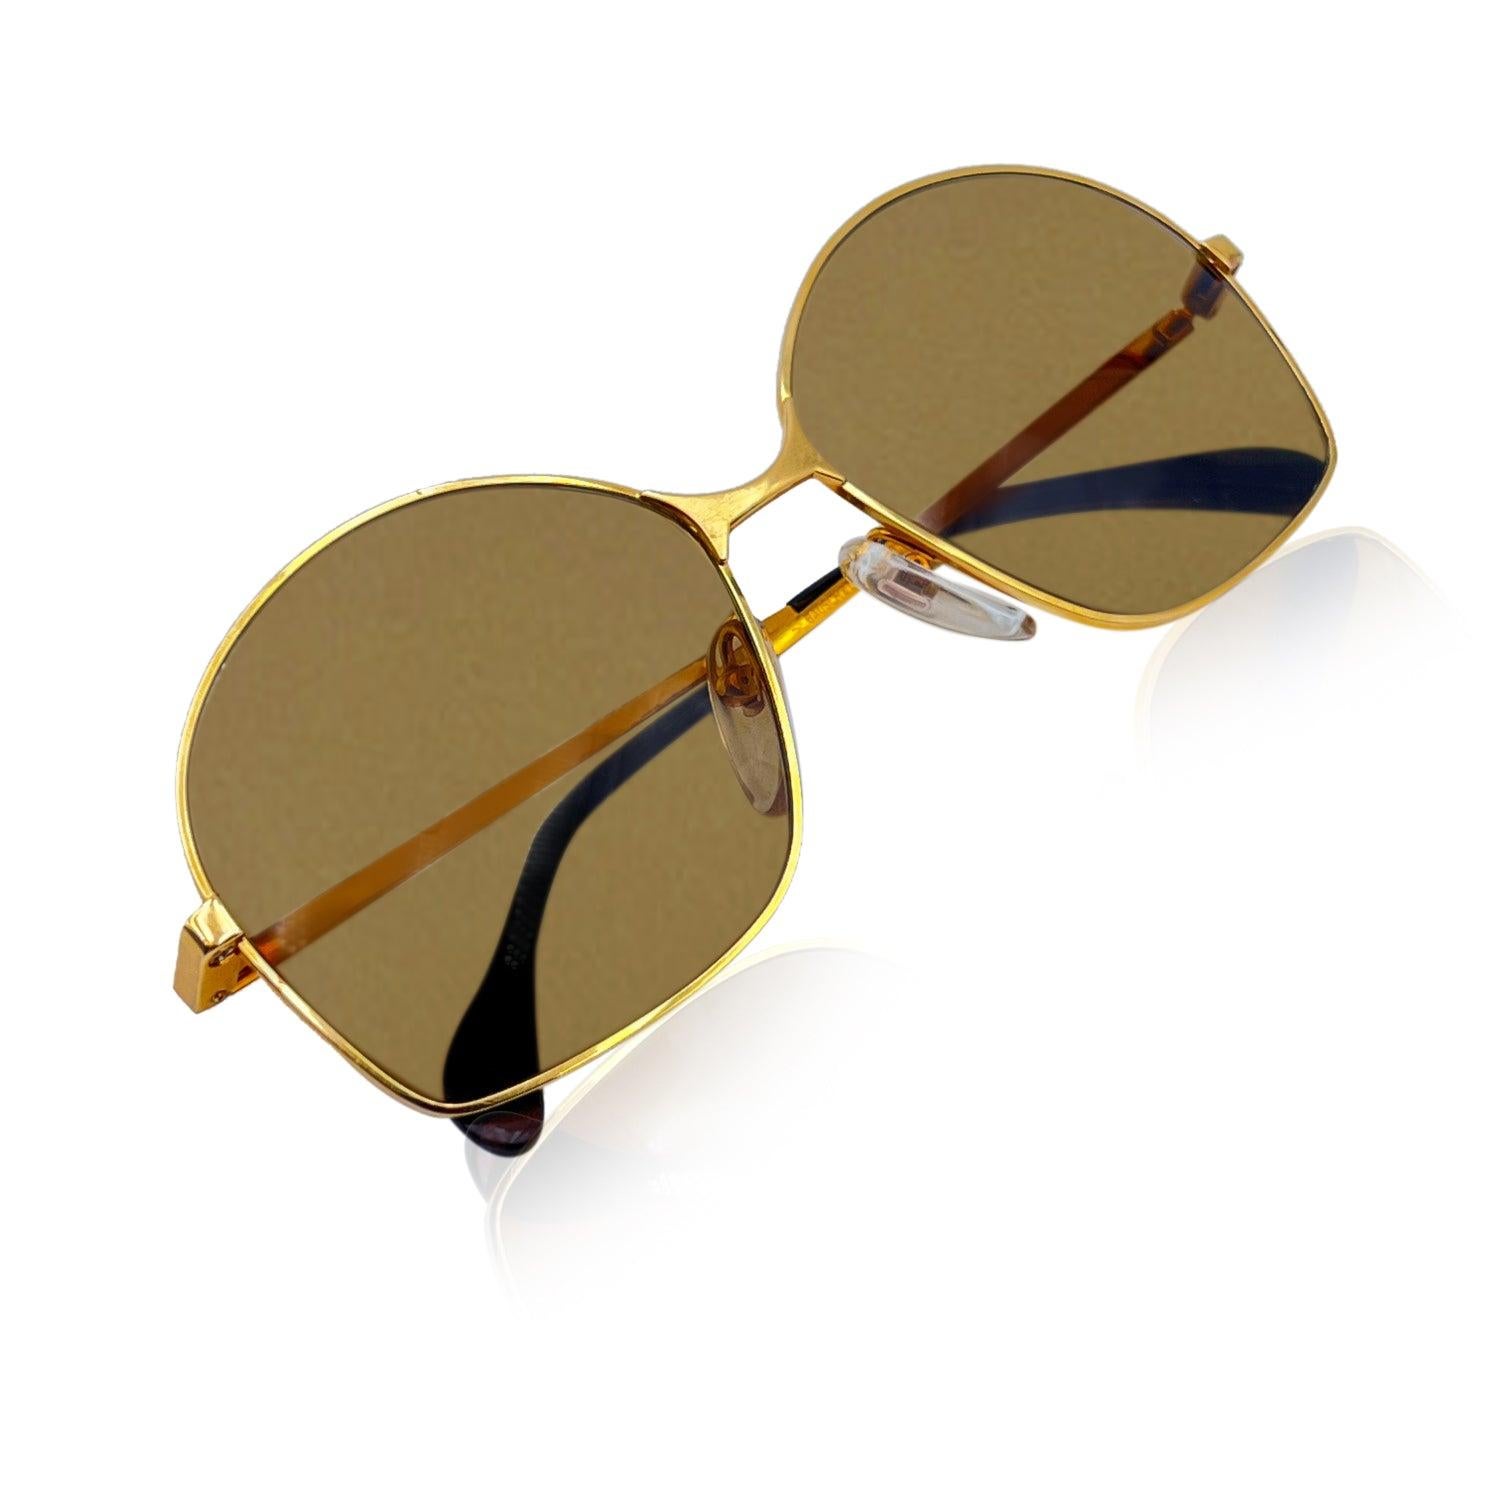 VERY RARE - Mint, Squared shaped Vintage Sunglasses by Bausch & Lomb, 